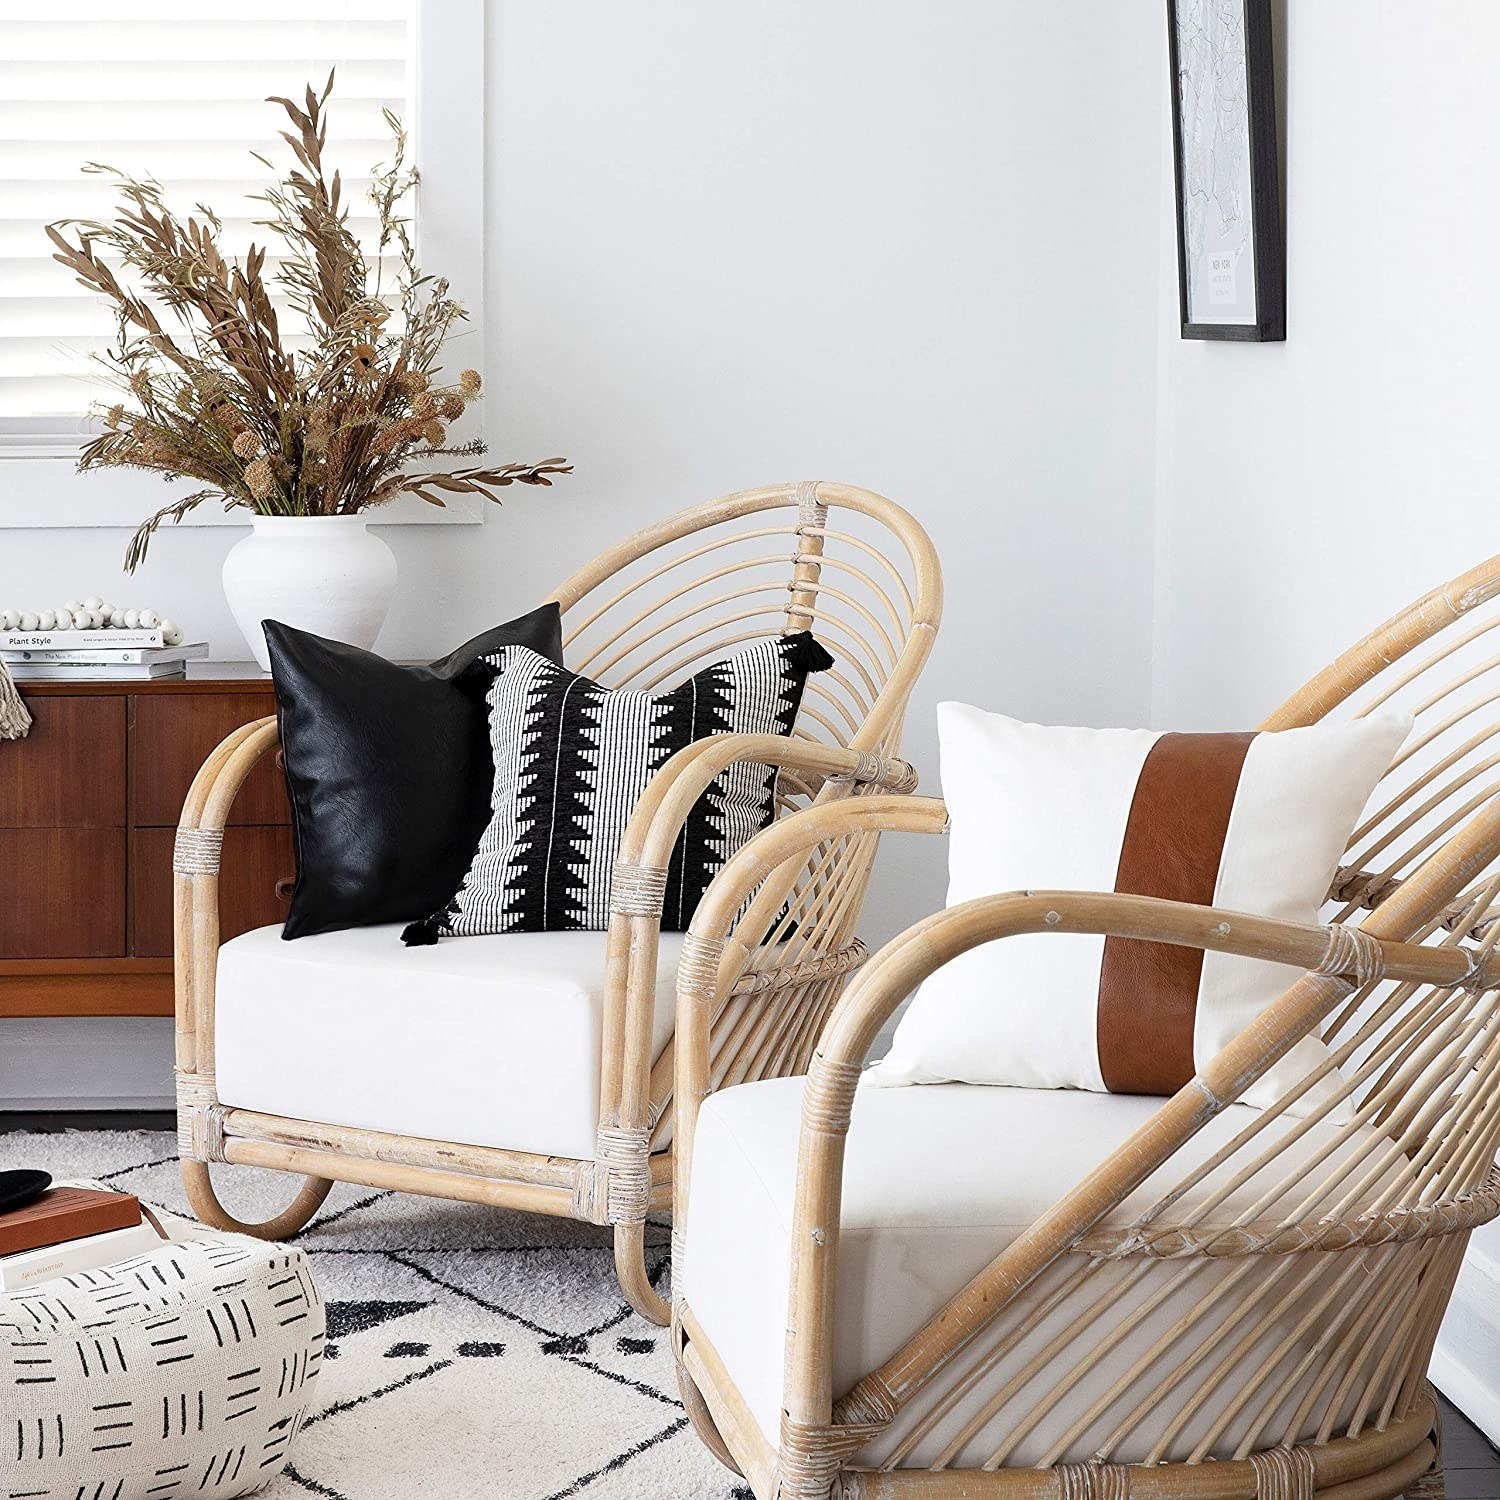 35 Pieces Of Furniture And Decor To Make It Look Like You Have It All Together